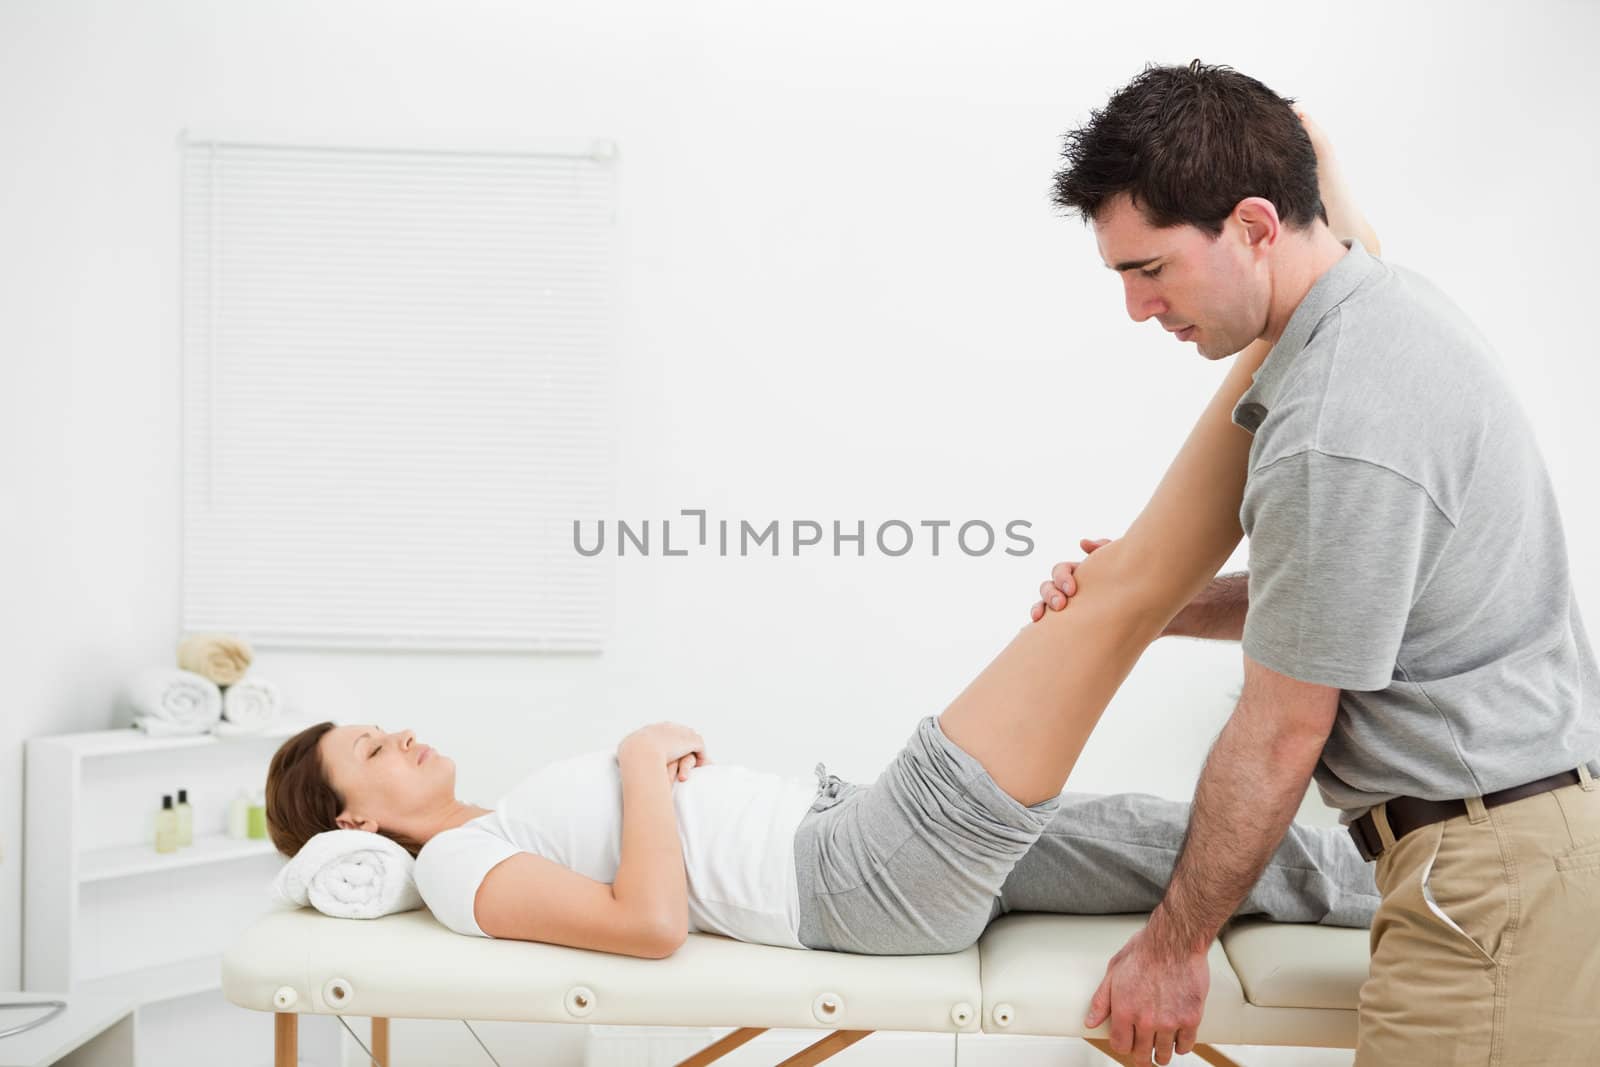 Man massaging a leg while placing it on his shoulder in a room